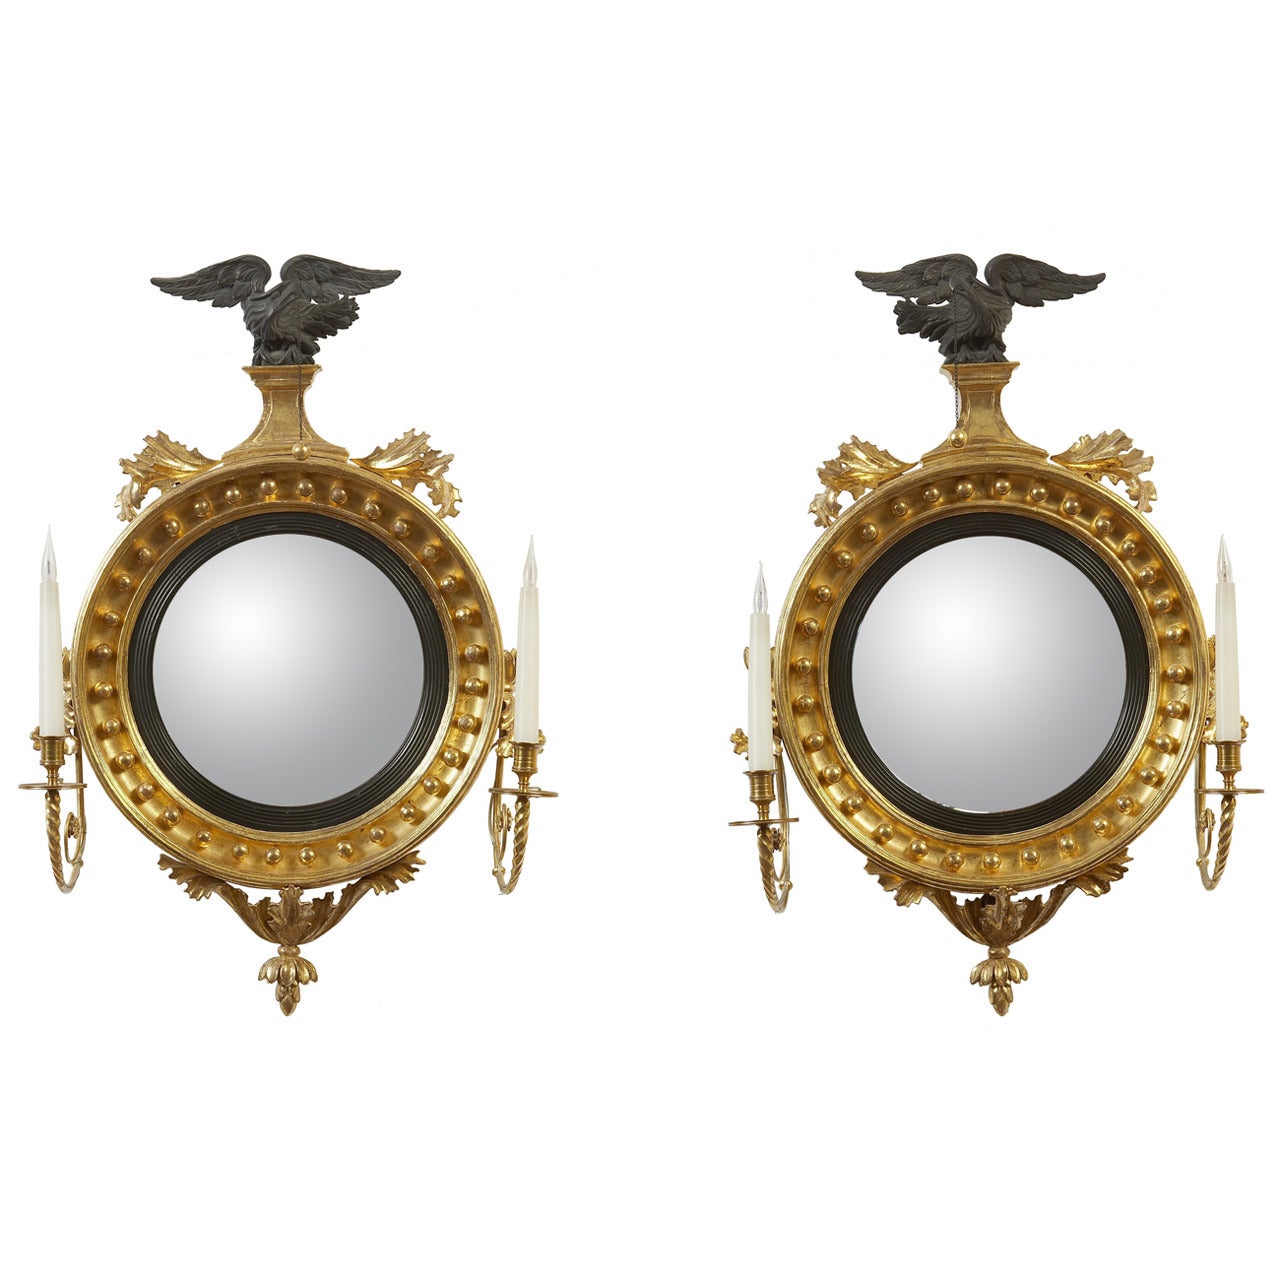 Fine and Small Pair of Regency Convex Mirrors, English, circa 1810 For Sale